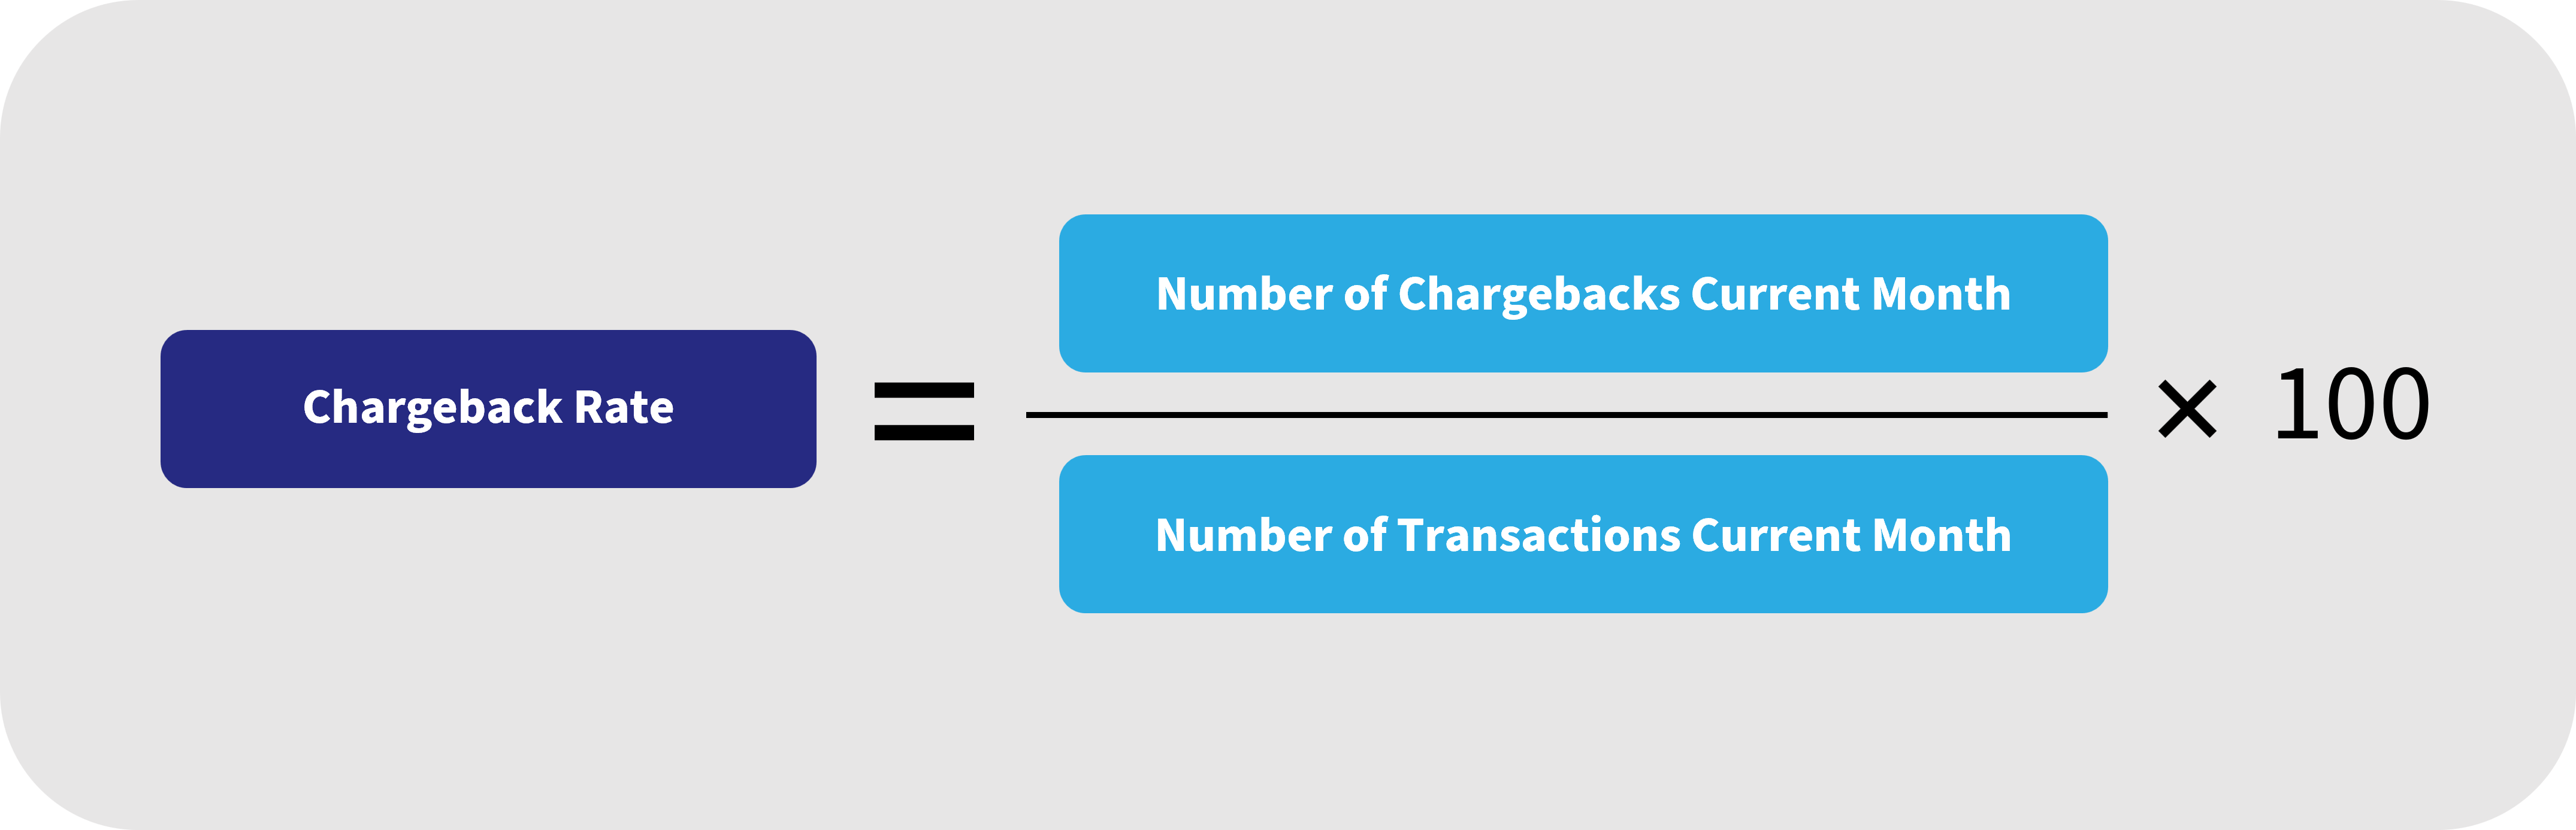 Chargeback rate = (number of chargebacks current month/number of transactions current month) x 100.